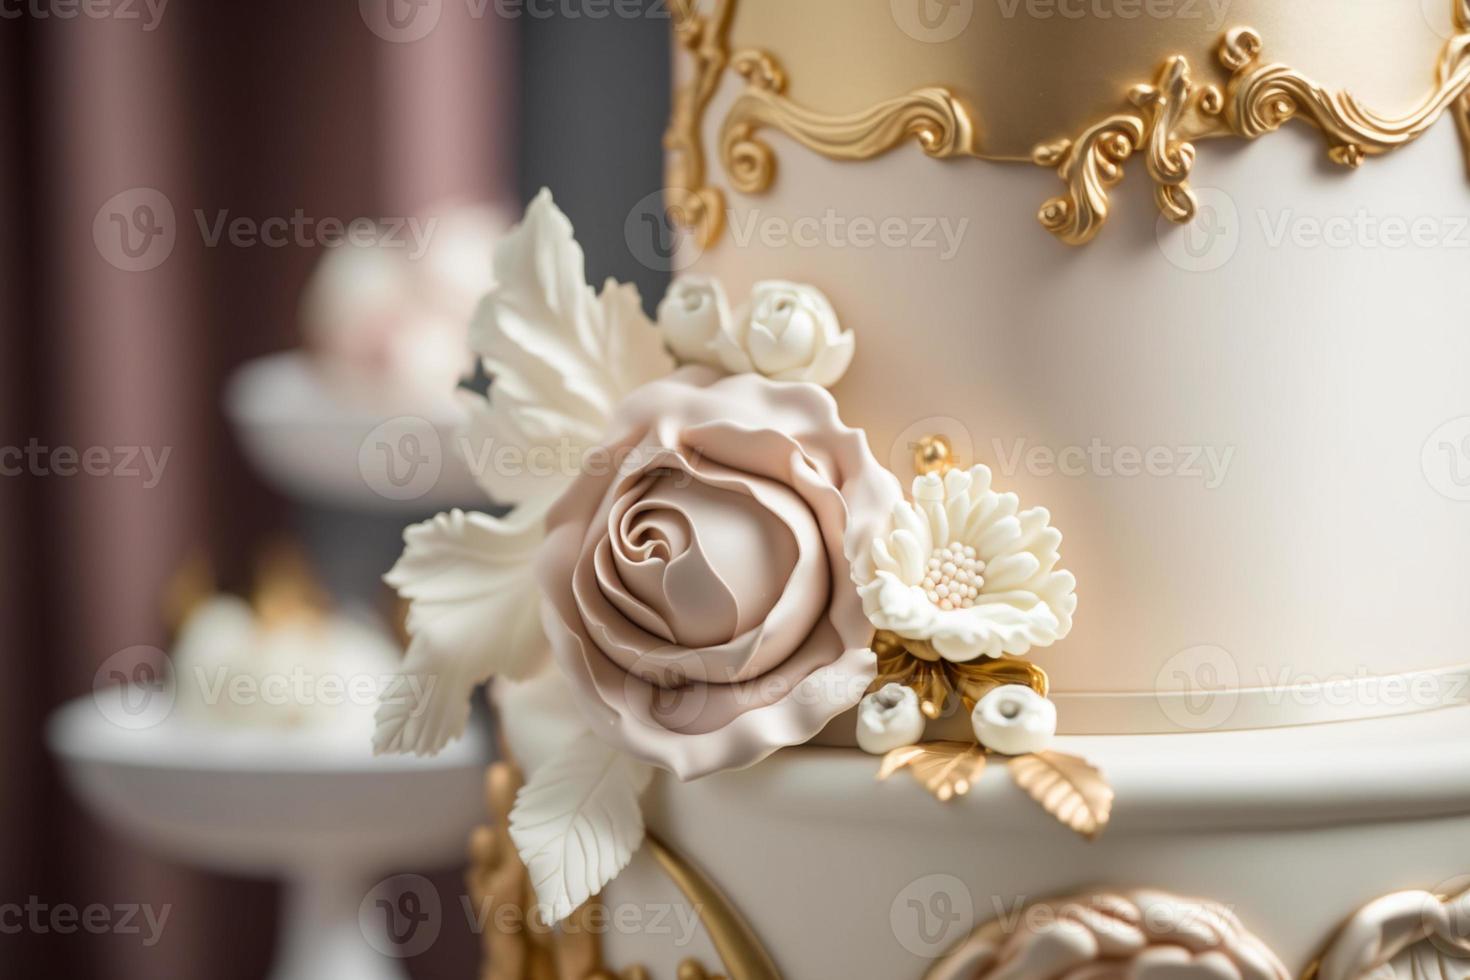 Wedding cake is the traditional cake served at wedding parties after the main meal. In modern Western culture, the cake is usually on display and served to guests during the reception. photo